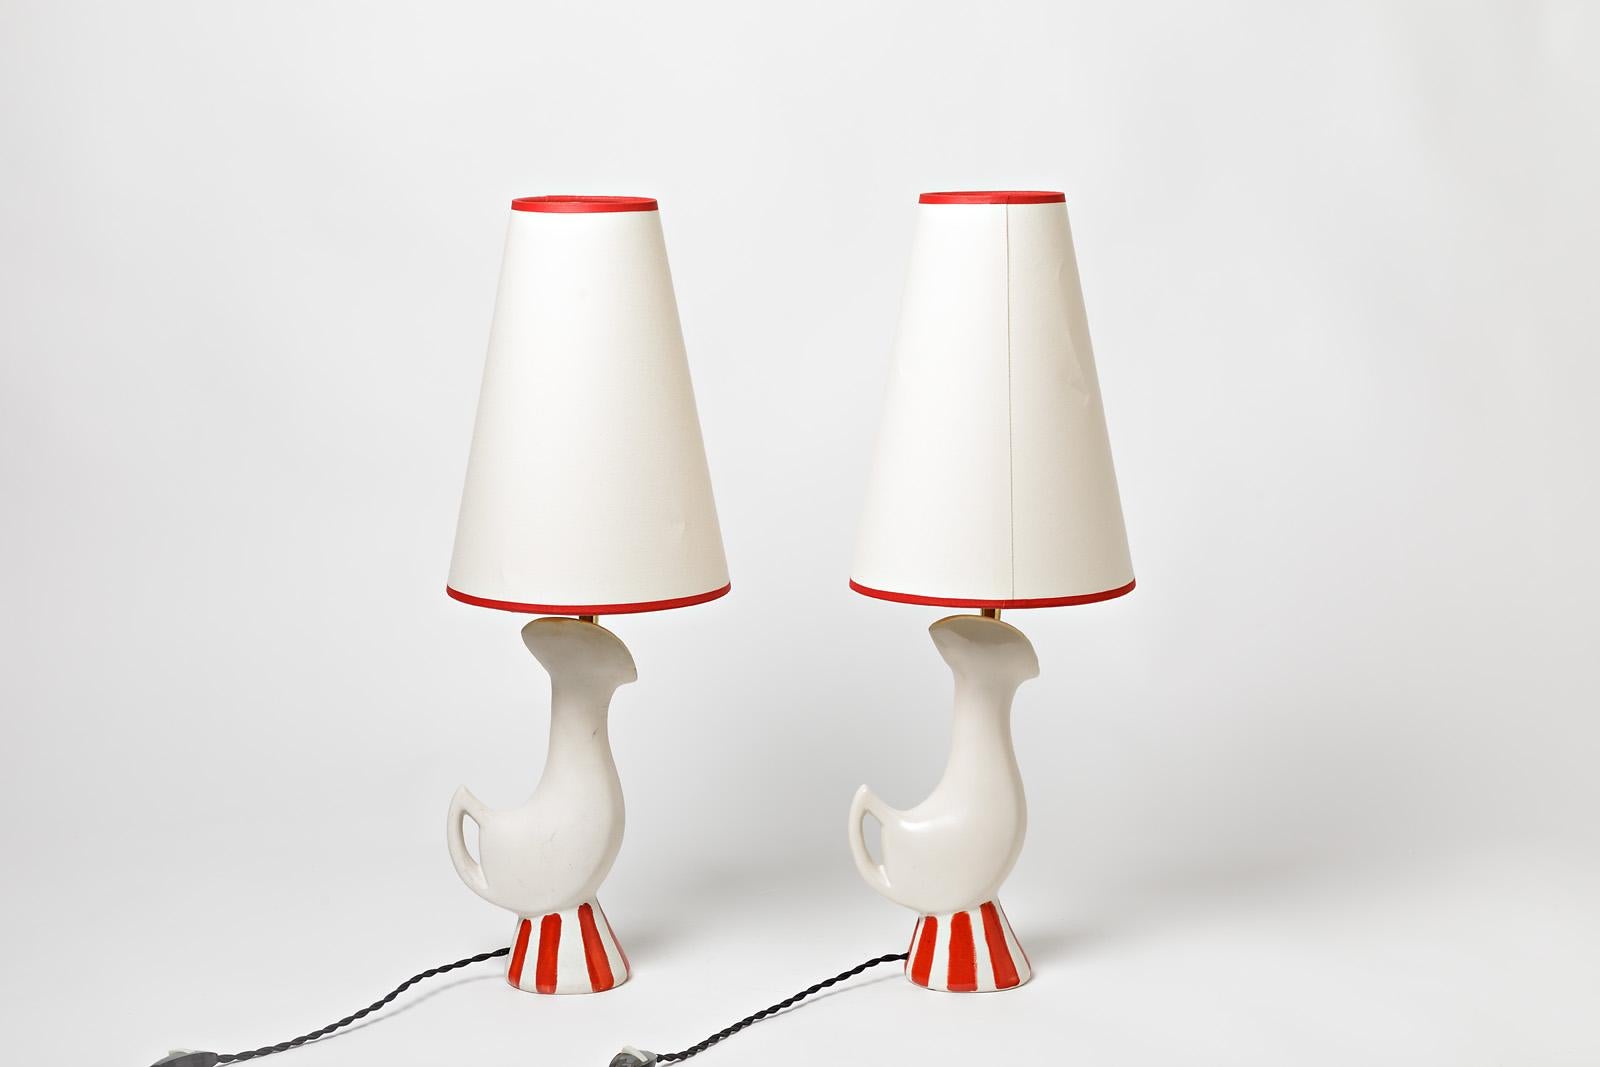 A zoomorphic pair of ceramic lamp by Poet- Laval.
Perfect original conditions.
Sold with a new lamp shades and new European electrical system.
Dimensions:
Lamp with lampshade and electrical system 57 x 20 cm / 22 ' 1/2 x 8' inches.
Lamp with